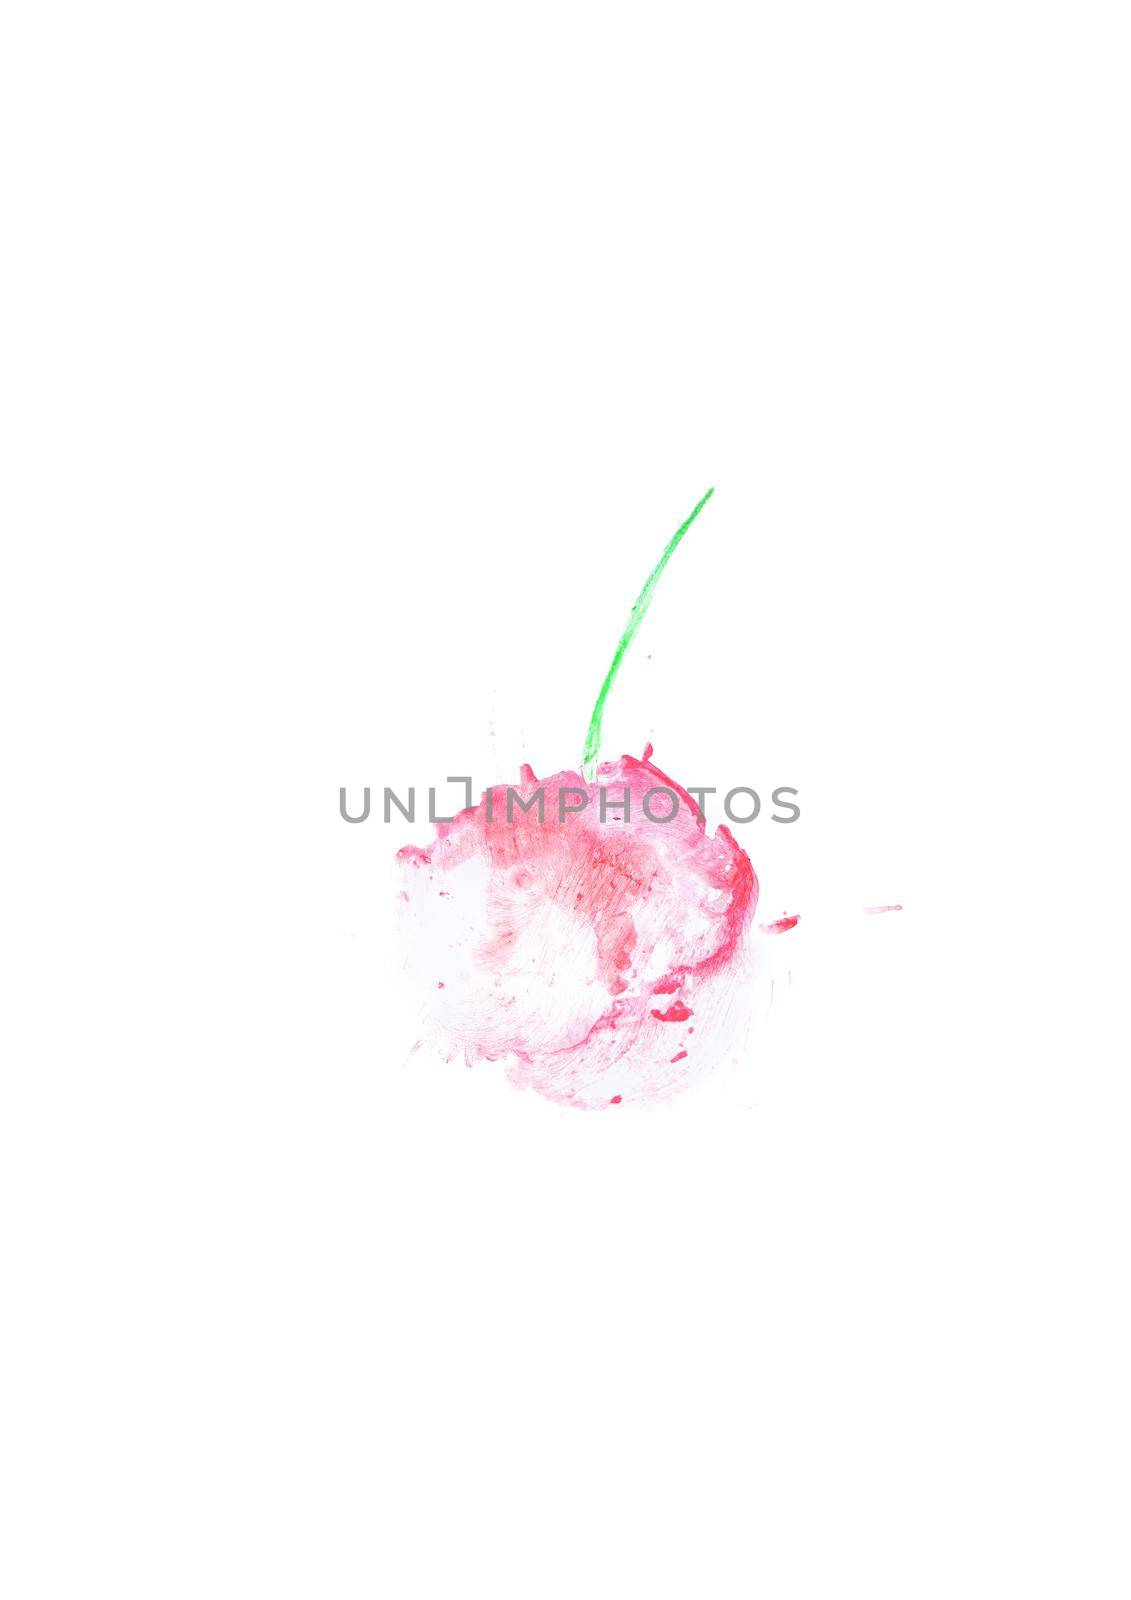 Delicate illustration of cherries made with wax and crayons. Sweet cherry illustration for logo or pattern